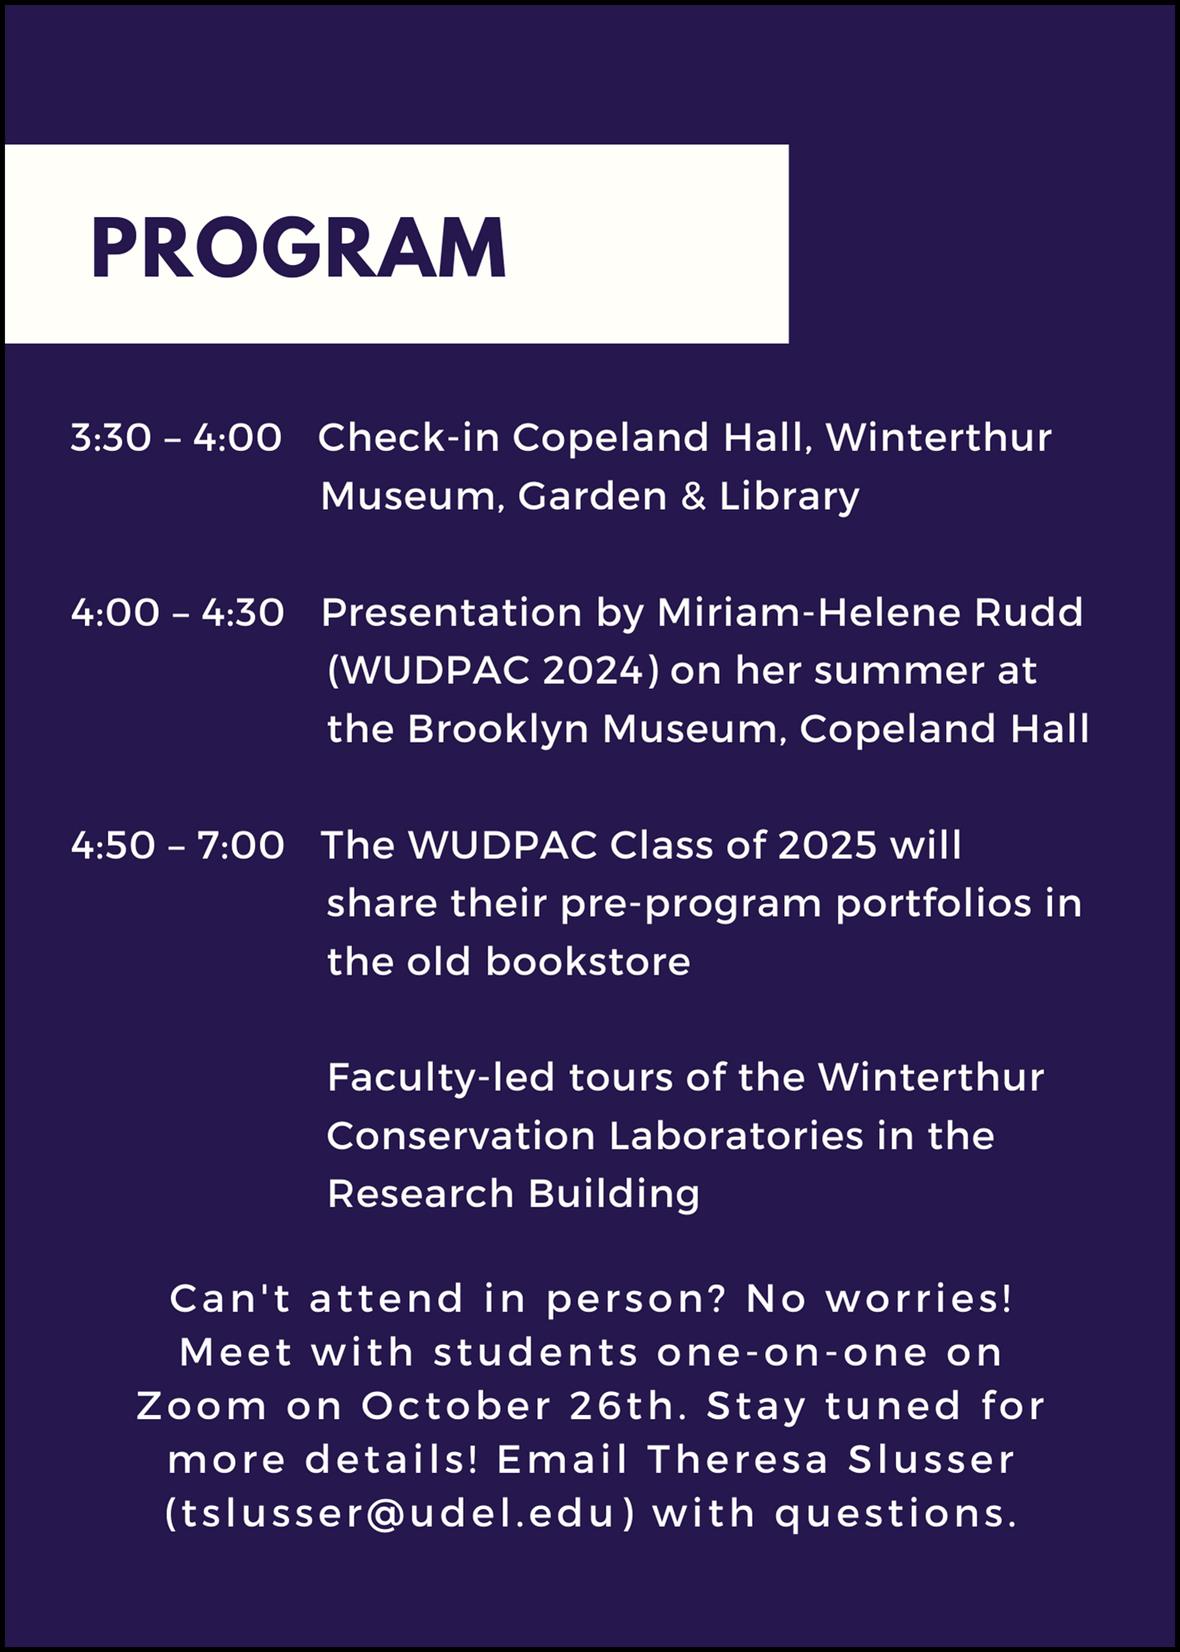 4:00-4:30 Miriam-Helene Rudd Summer Work Project Talk 4:30-7:00 The WUDPAC Class of 2024 will share their pre-program portfolios and visitors can attend faculty-led tours of the Winterthur Conservation Laboratories in the Research Building